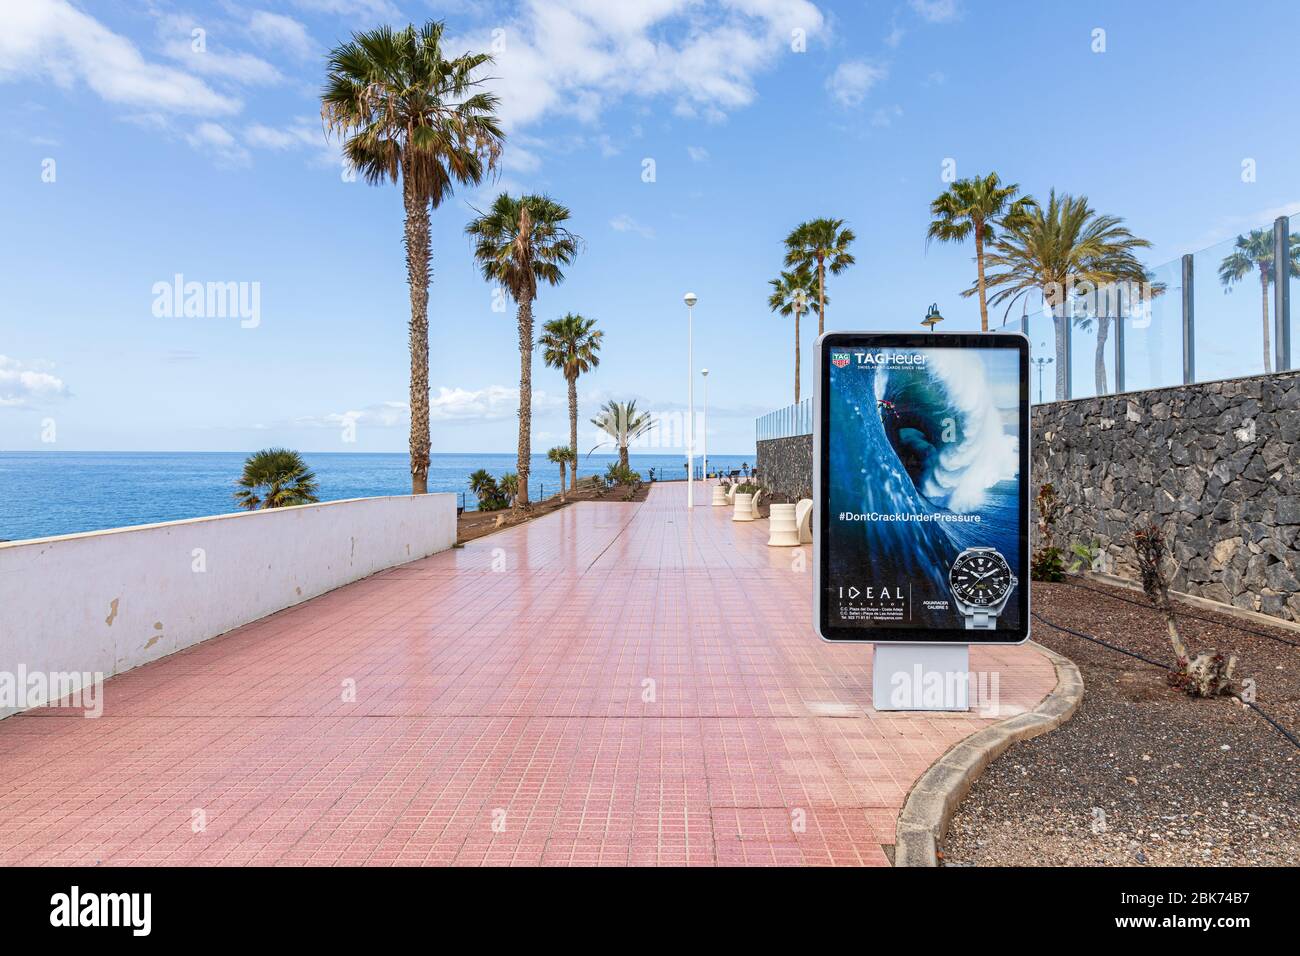 Advertising hoardings on a walkway during the covid 19 lockdown in the tourist resort area of Costa Adeje, Tenerife, Canary Islands, Spain Stock Photo